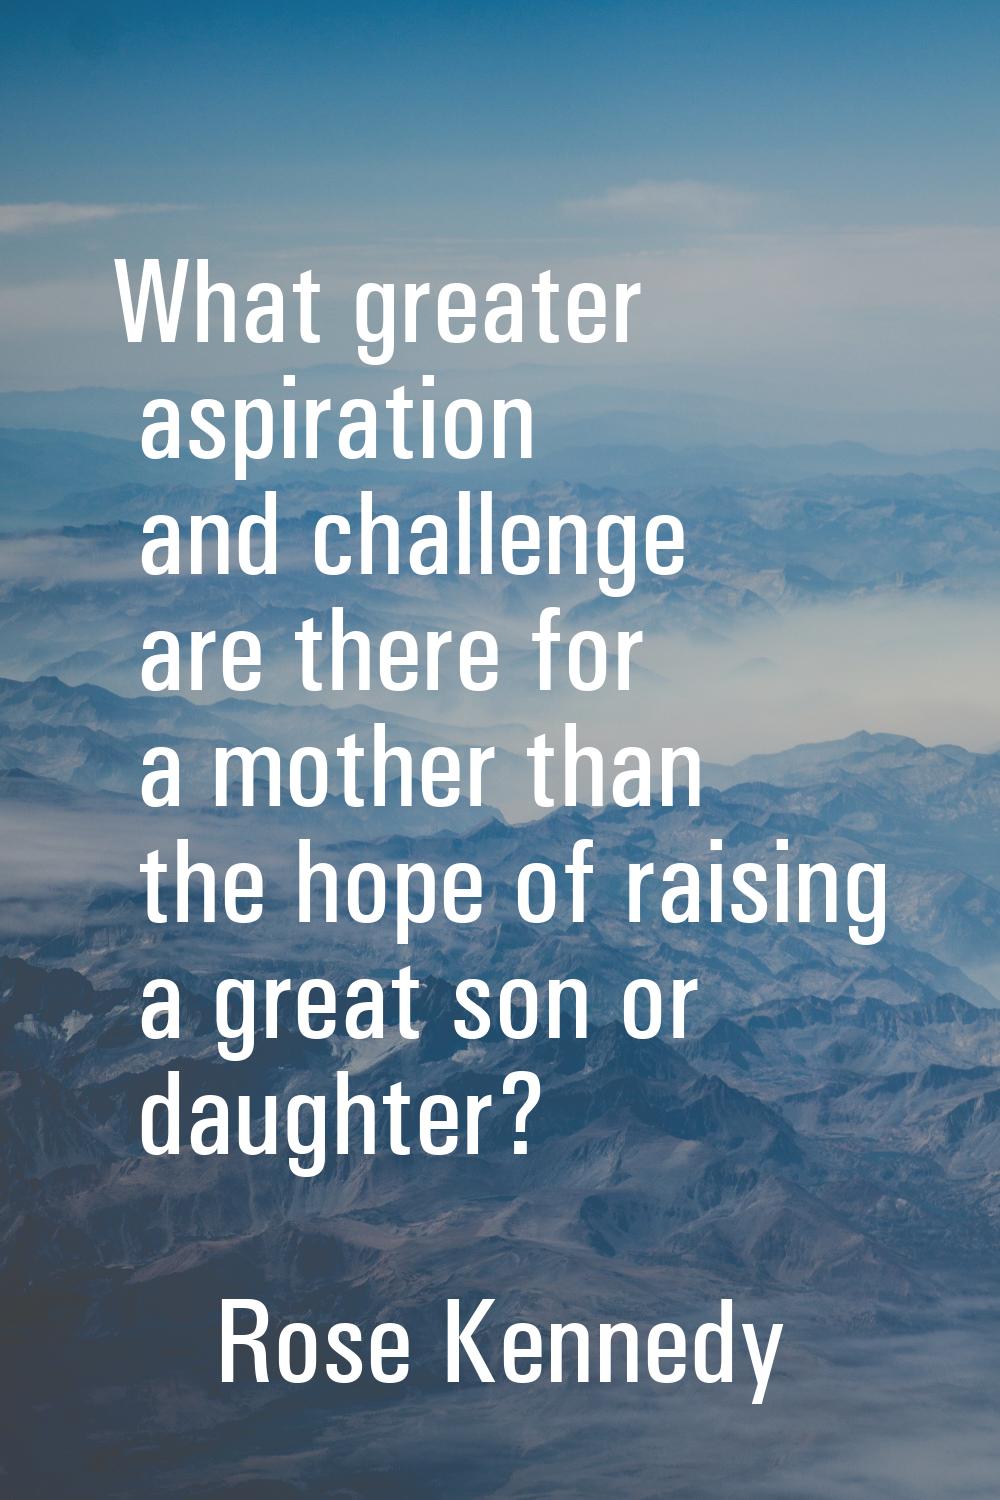 What greater aspiration and challenge are there for a mother than the hope of raising a great son o